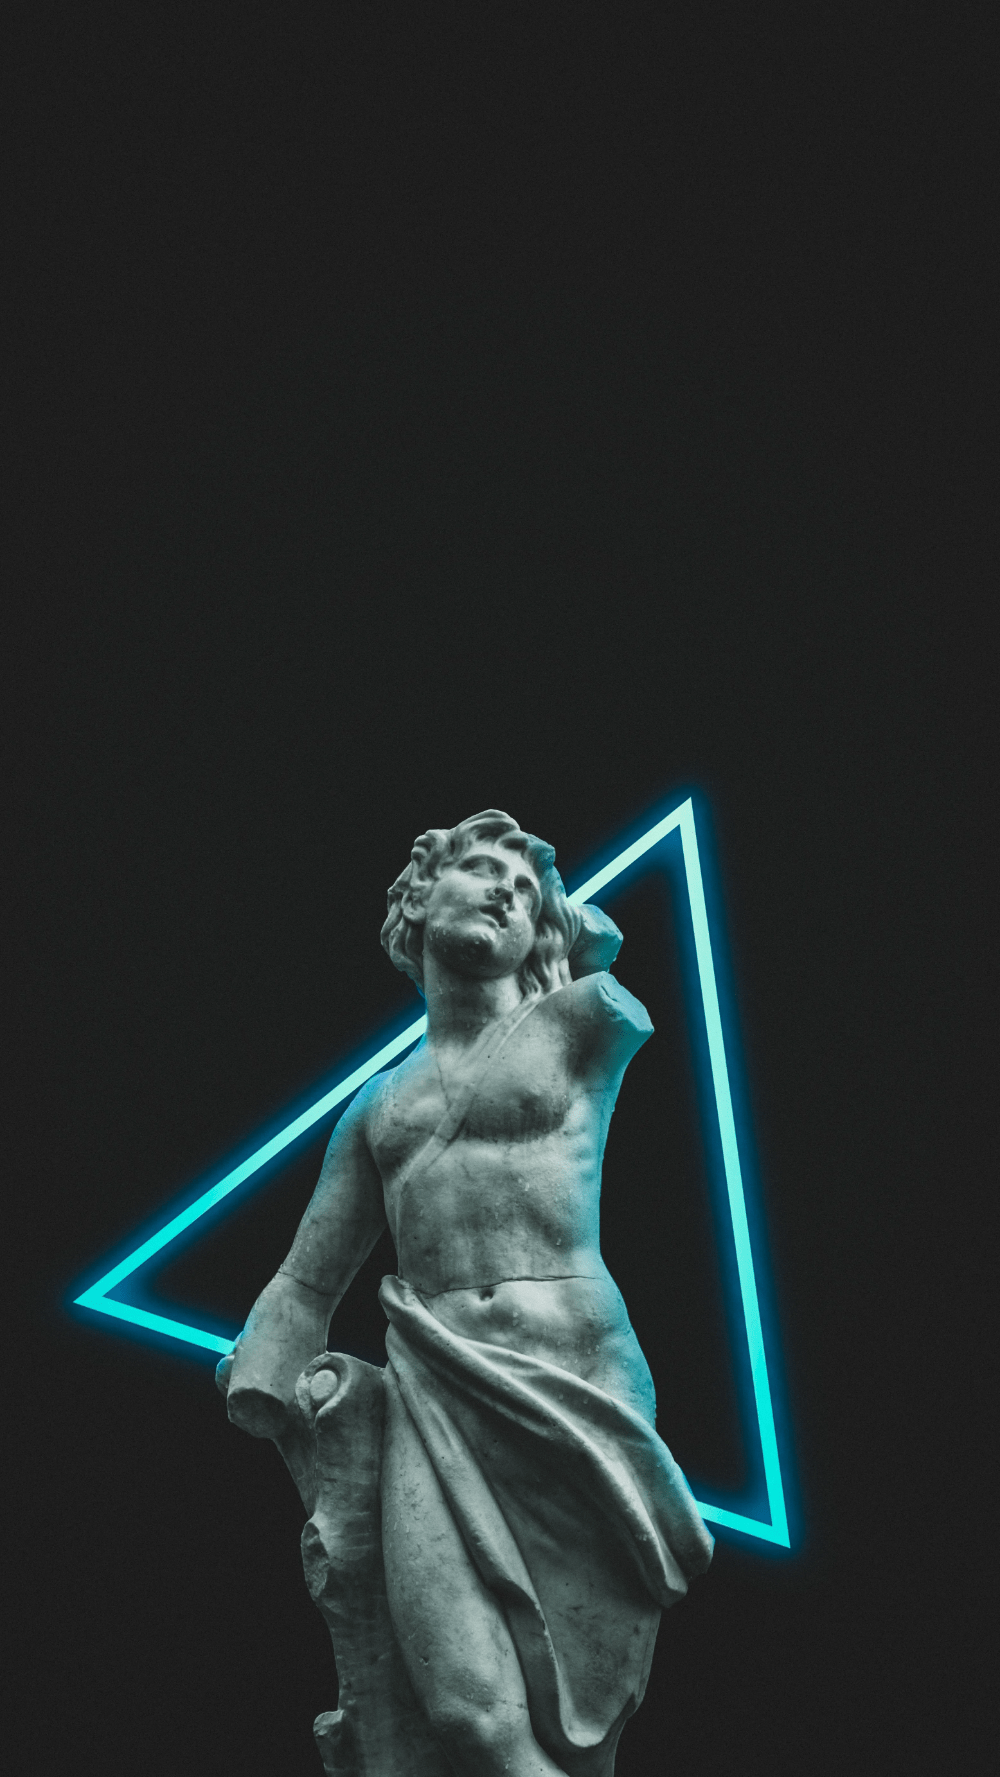 Aesthetic statue of a man with a neon blue triangle behind it - Statue